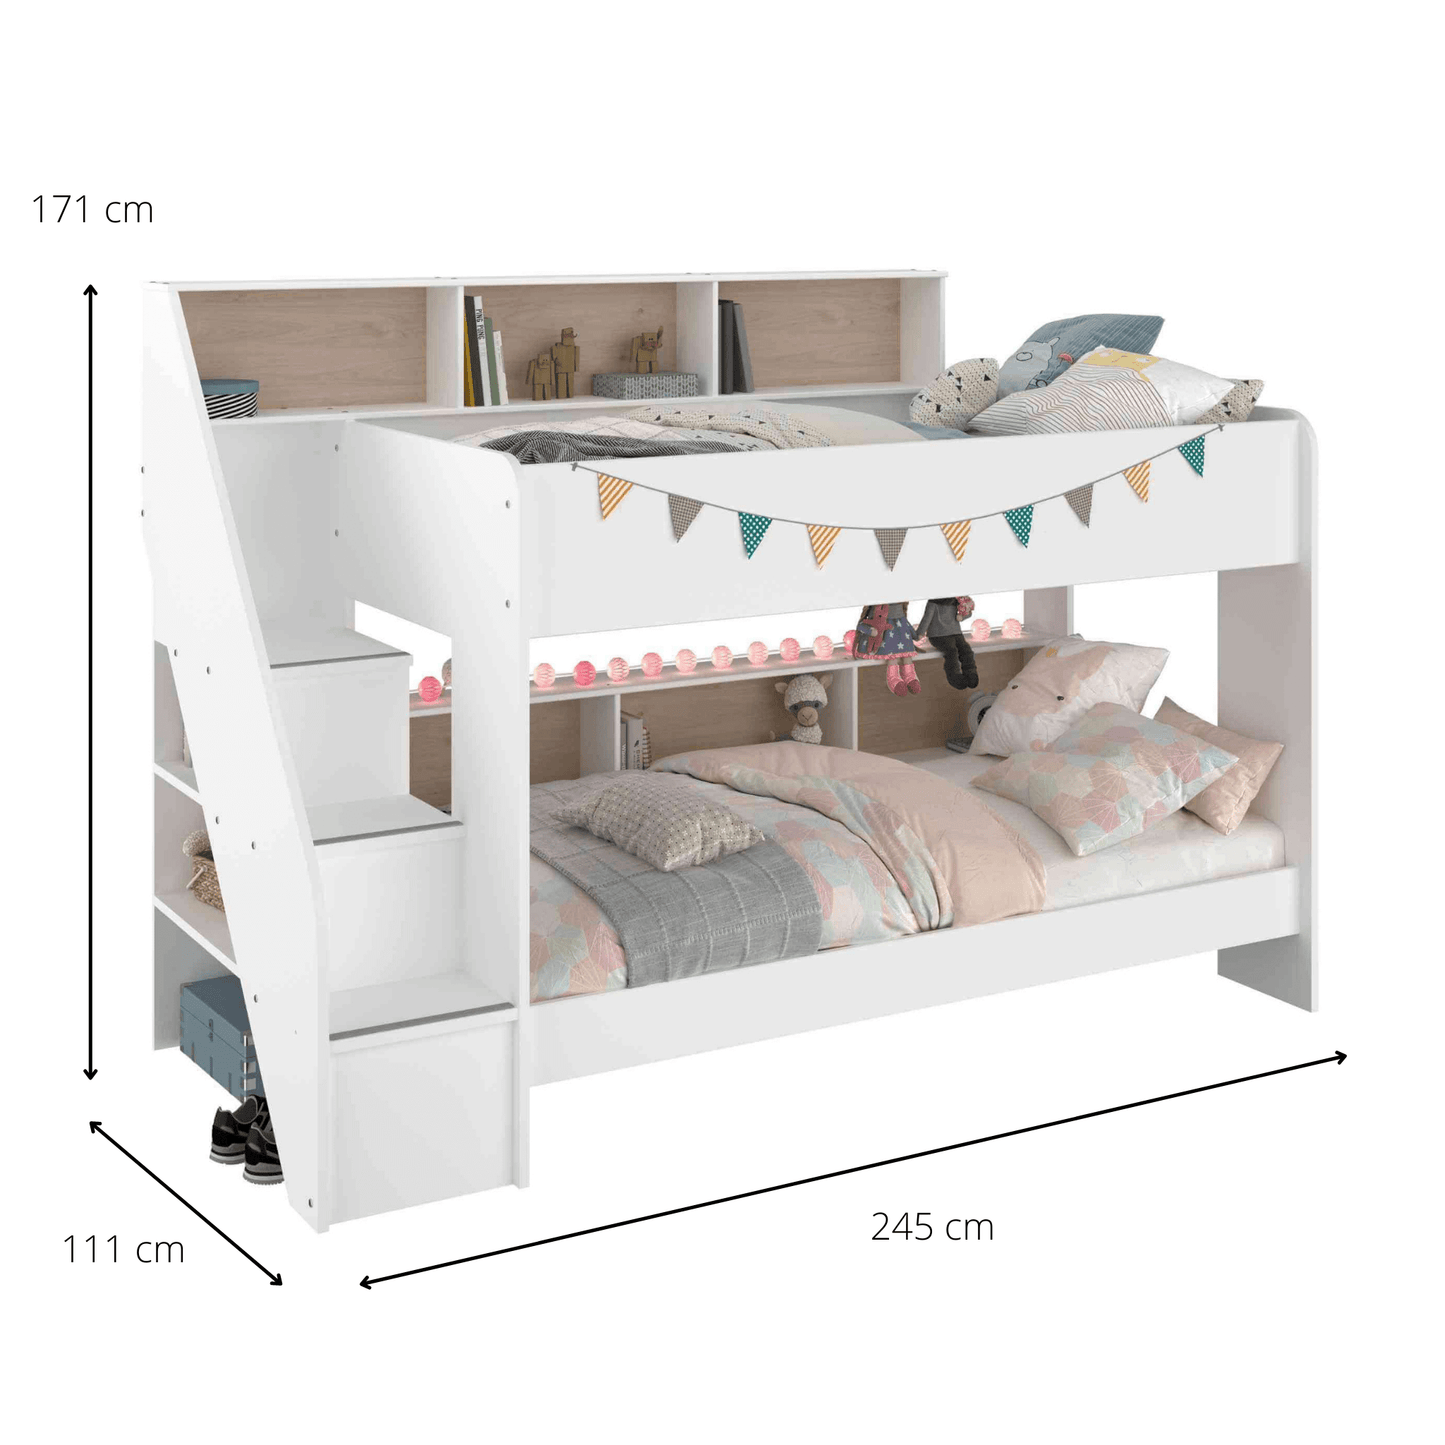 Parisot Biblio Bunk Bed with Stairs Dimensions